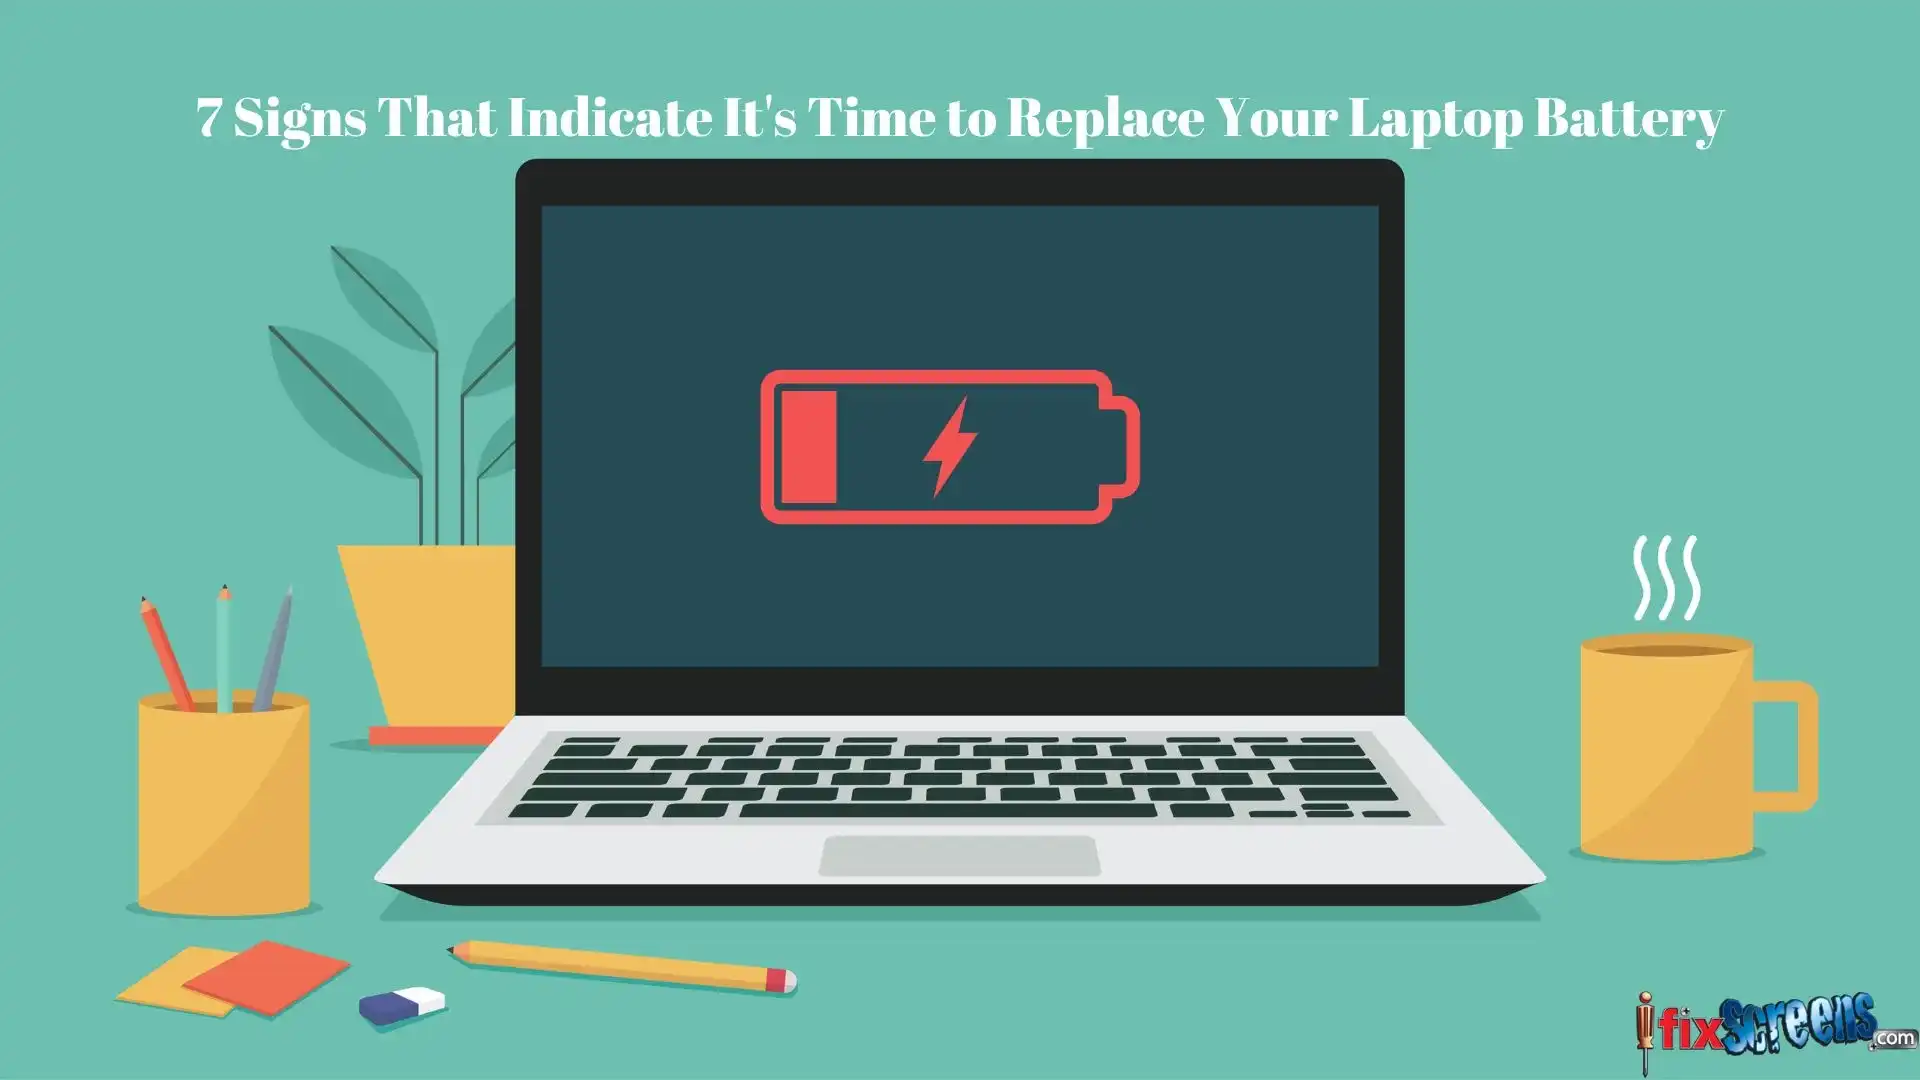 7 Signs That Indicate It's Time To Replace Your Laptop Battery